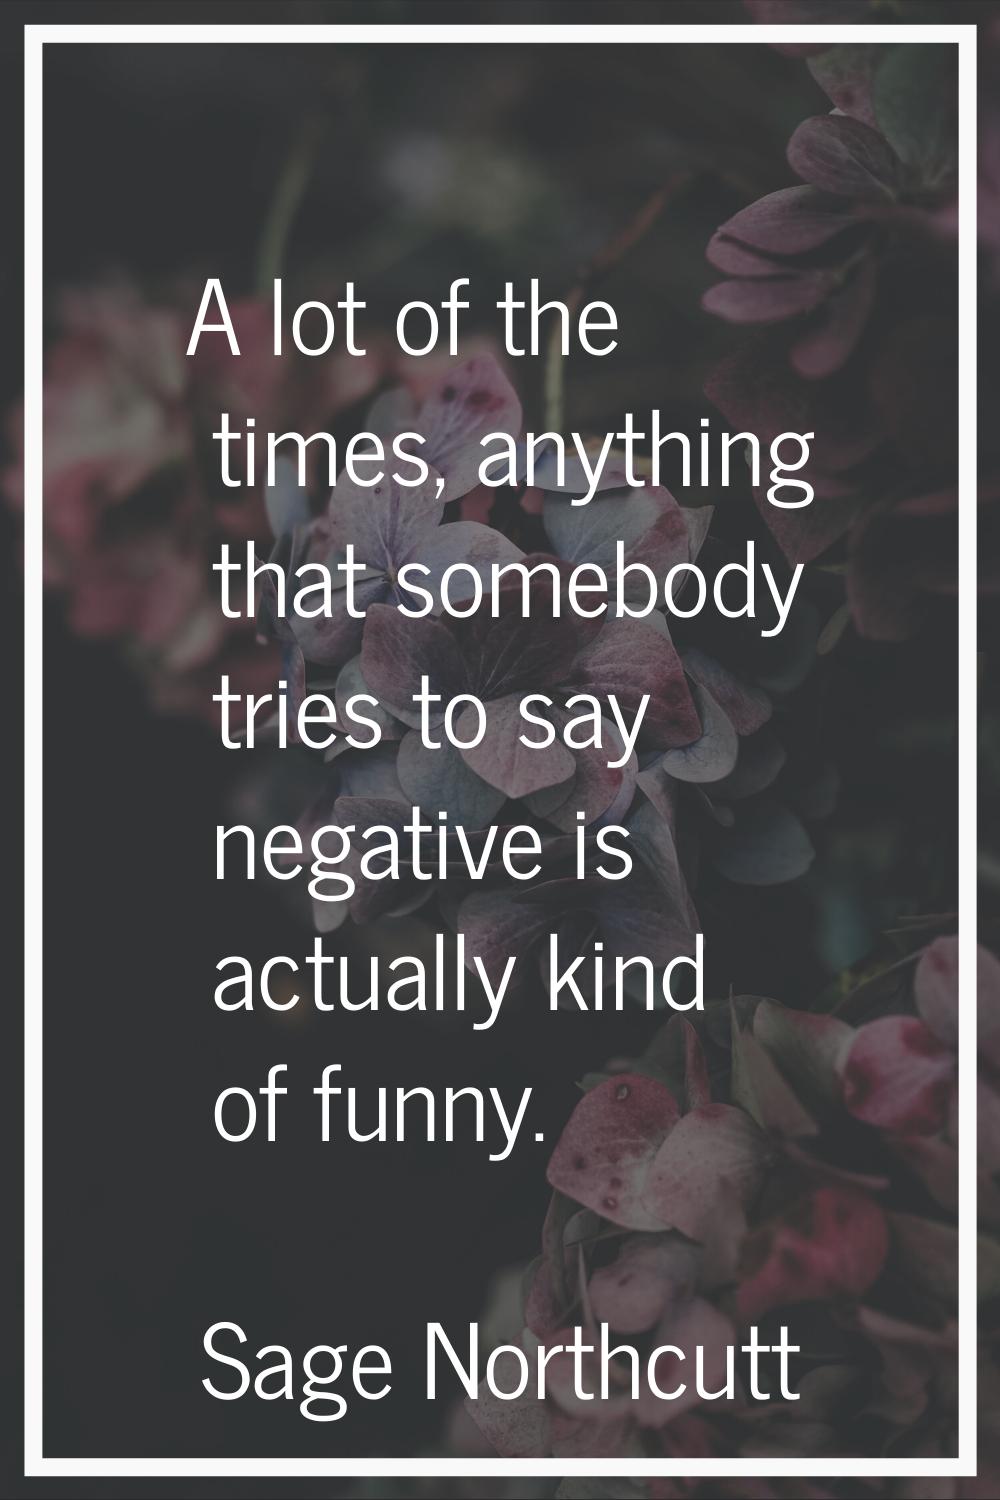 A lot of the times, anything that somebody tries to say negative is actually kind of funny.